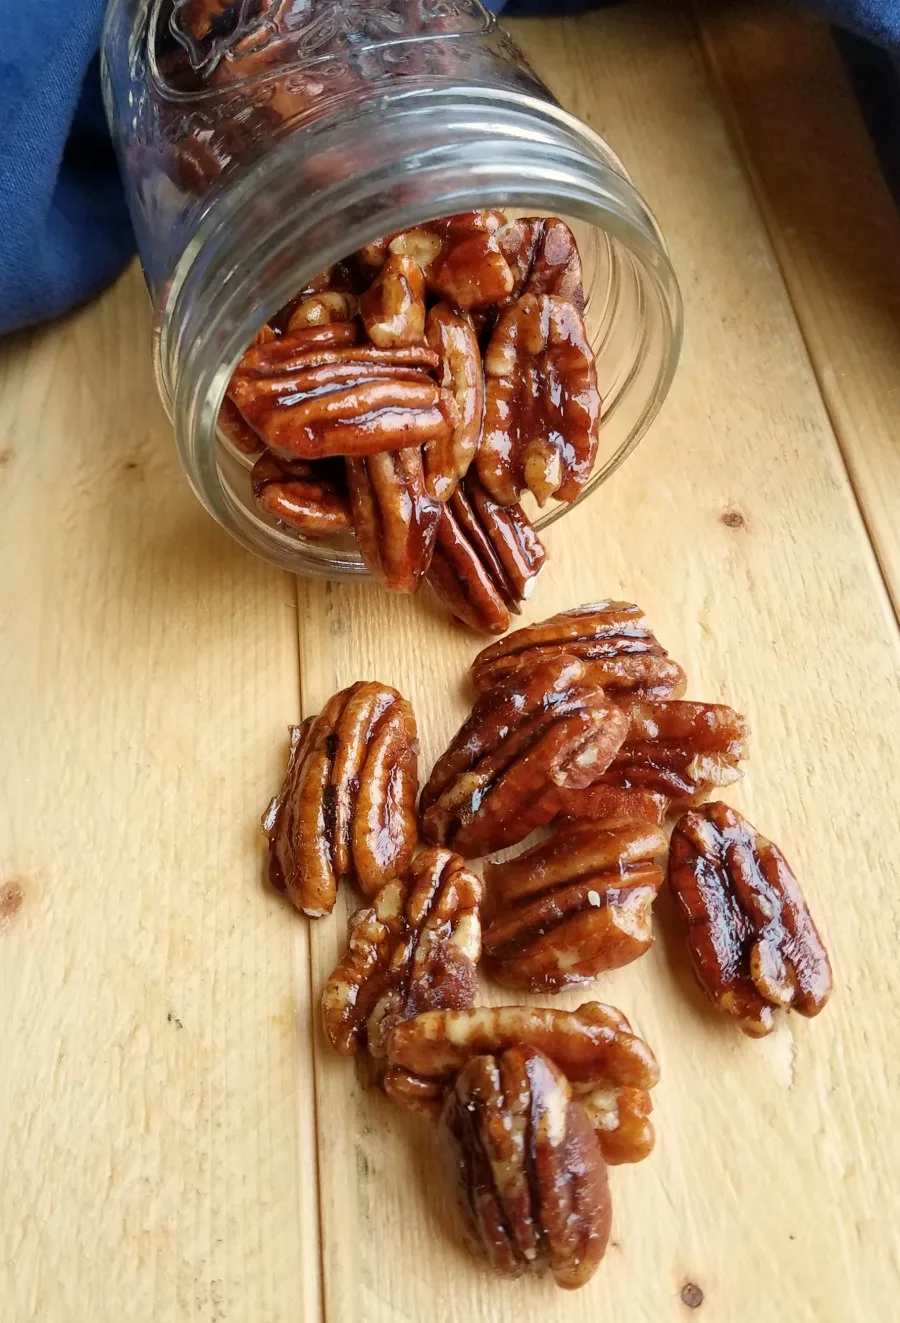 bowl of pecans with crunchy caramel coating.